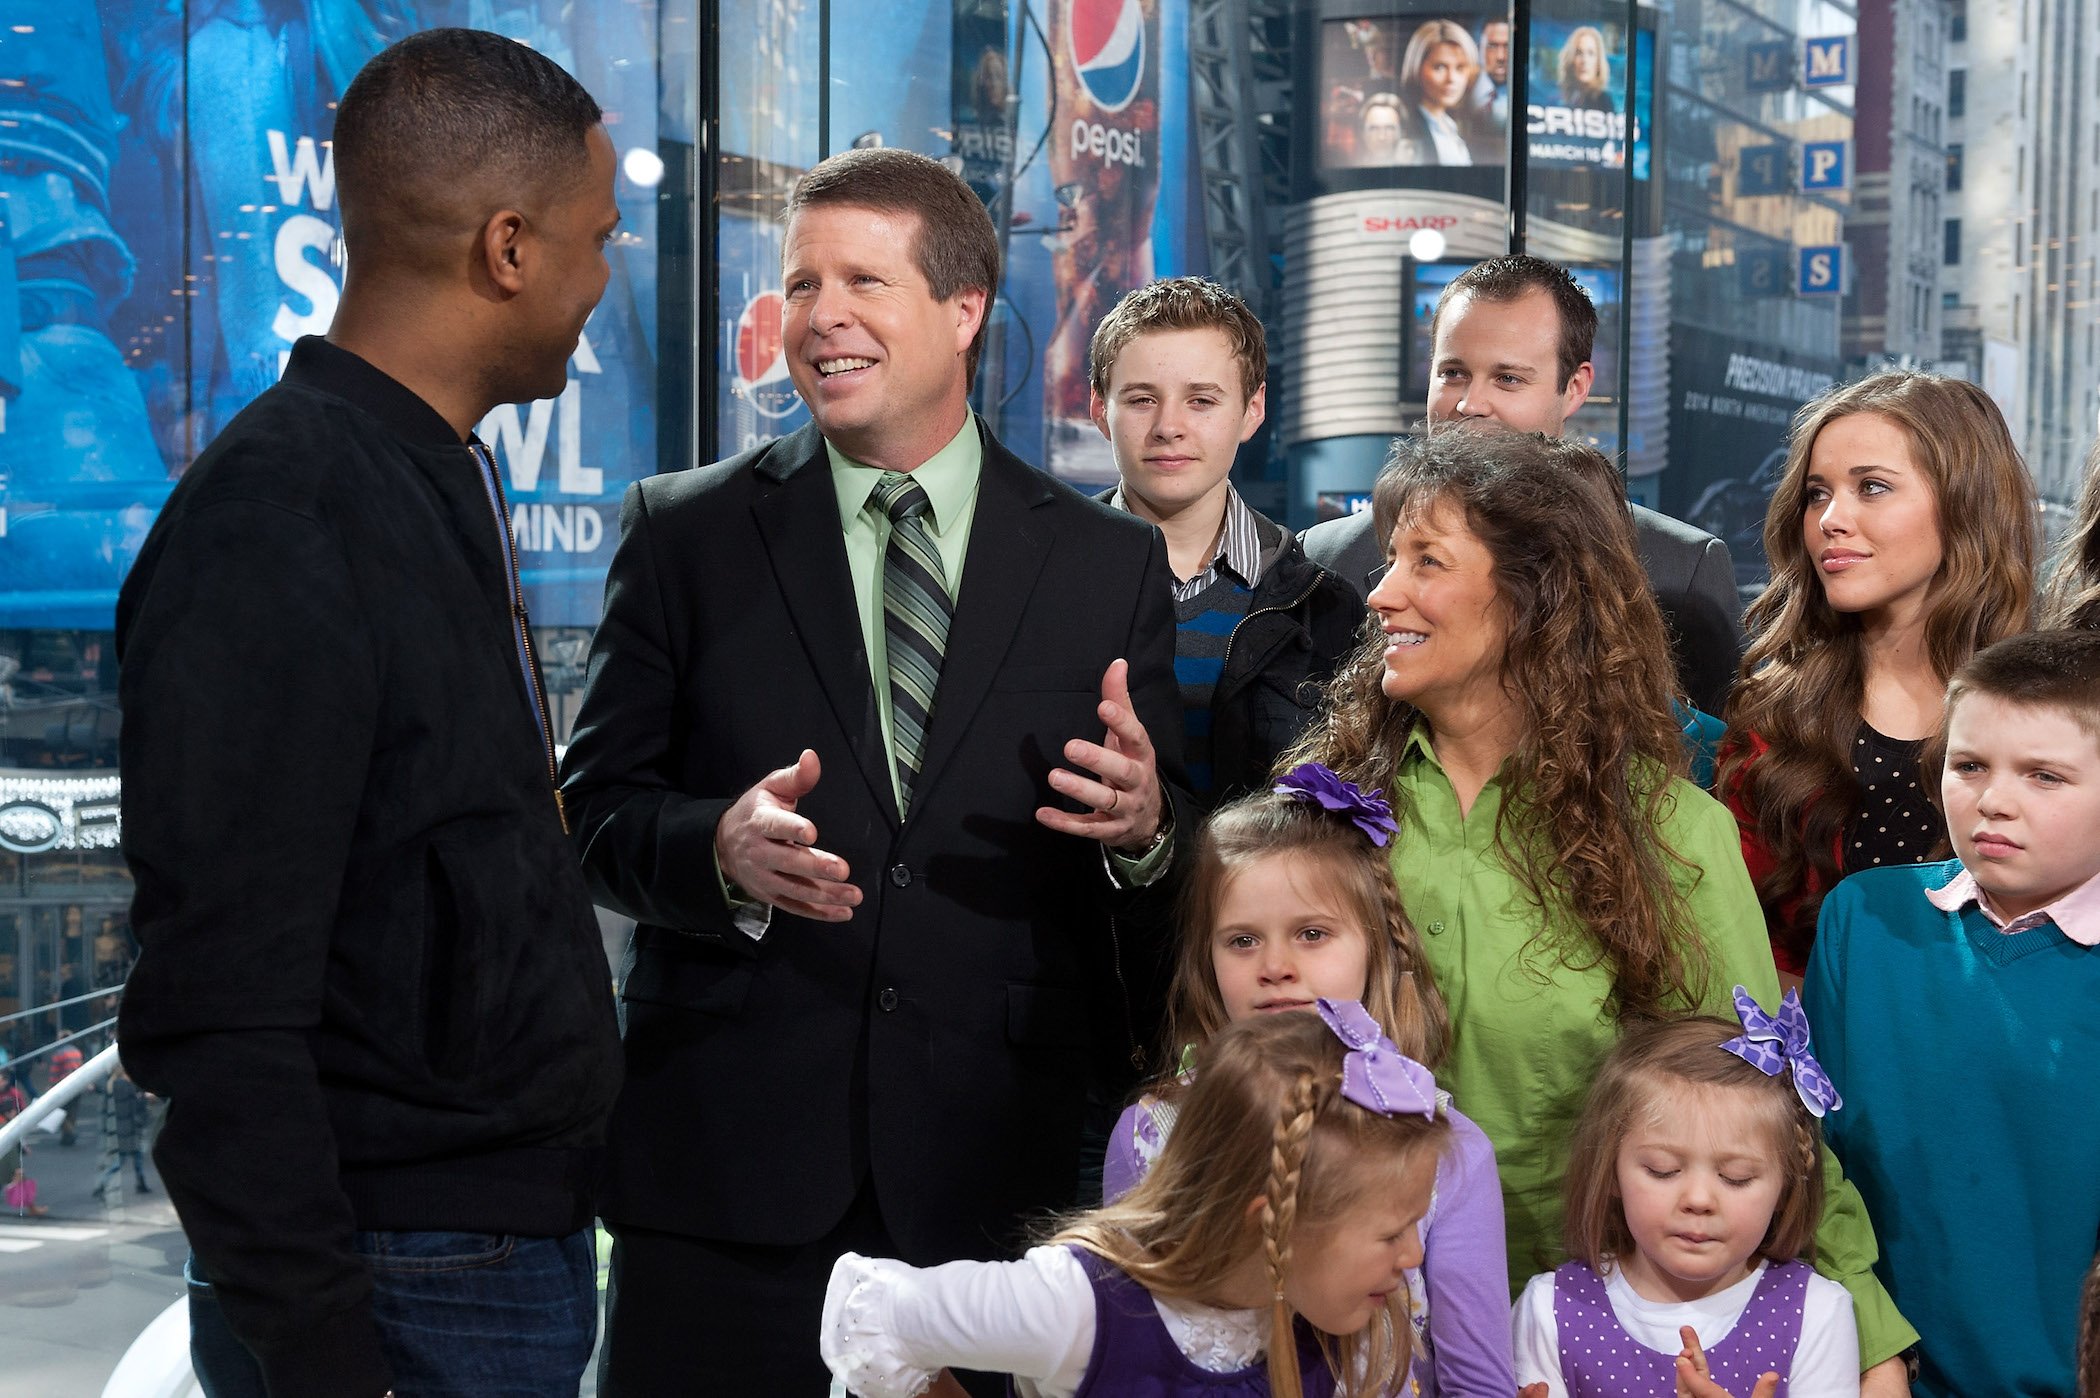 AJ Calloway (L) interviews the Duggar family from 'Counting On' during their visit to 'Extra' at their New York studios